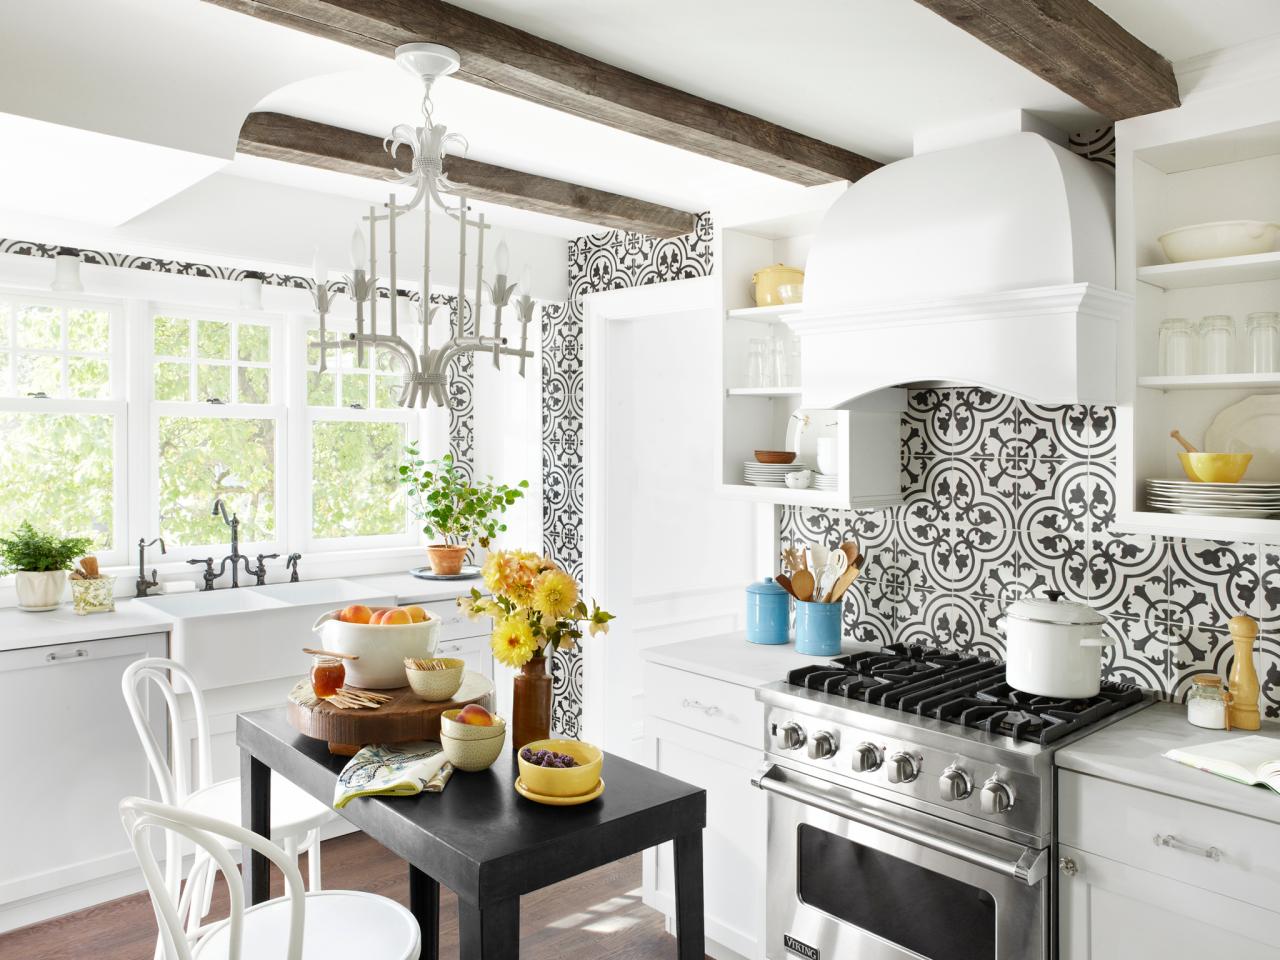 A Small Kitchen With Big Decorating Ideas   HGTV